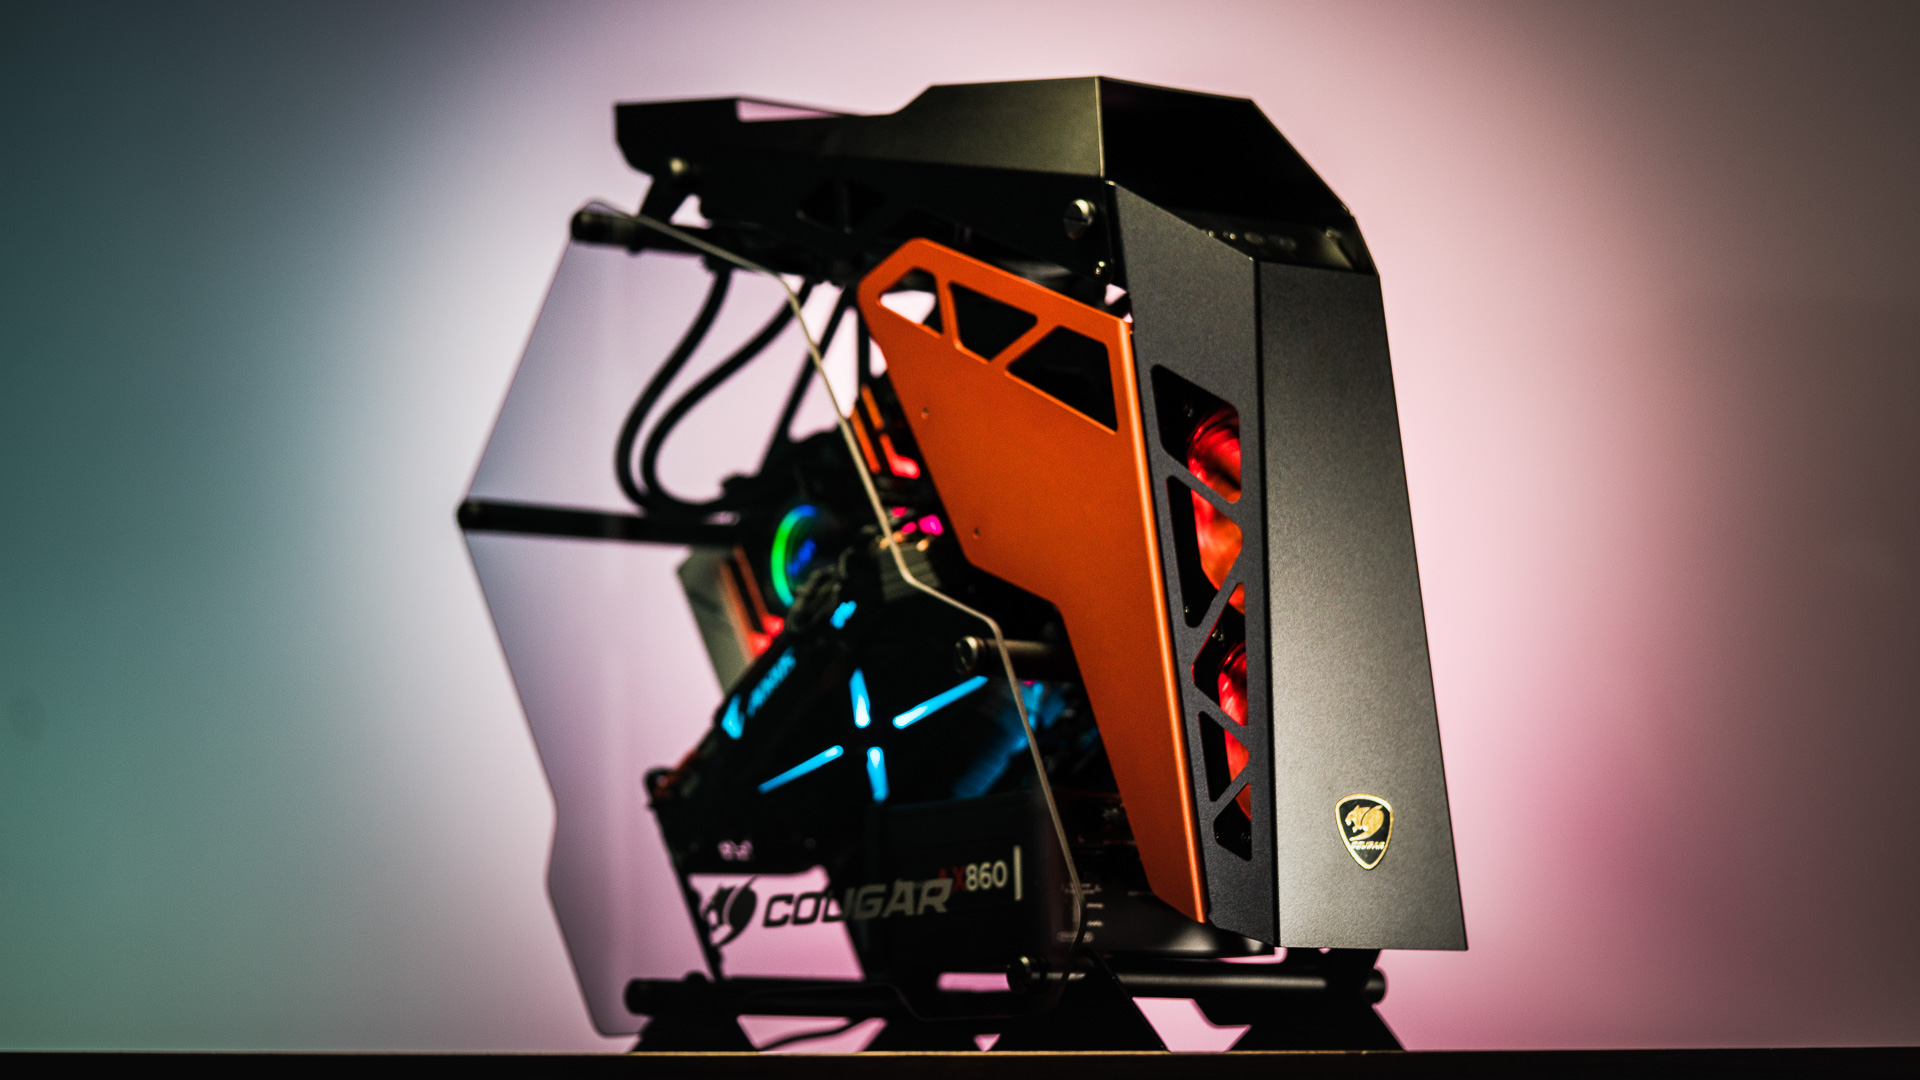 Steward realistisk Hovedløse Building a Gaming PC for the First Time? This Guide Can Help.